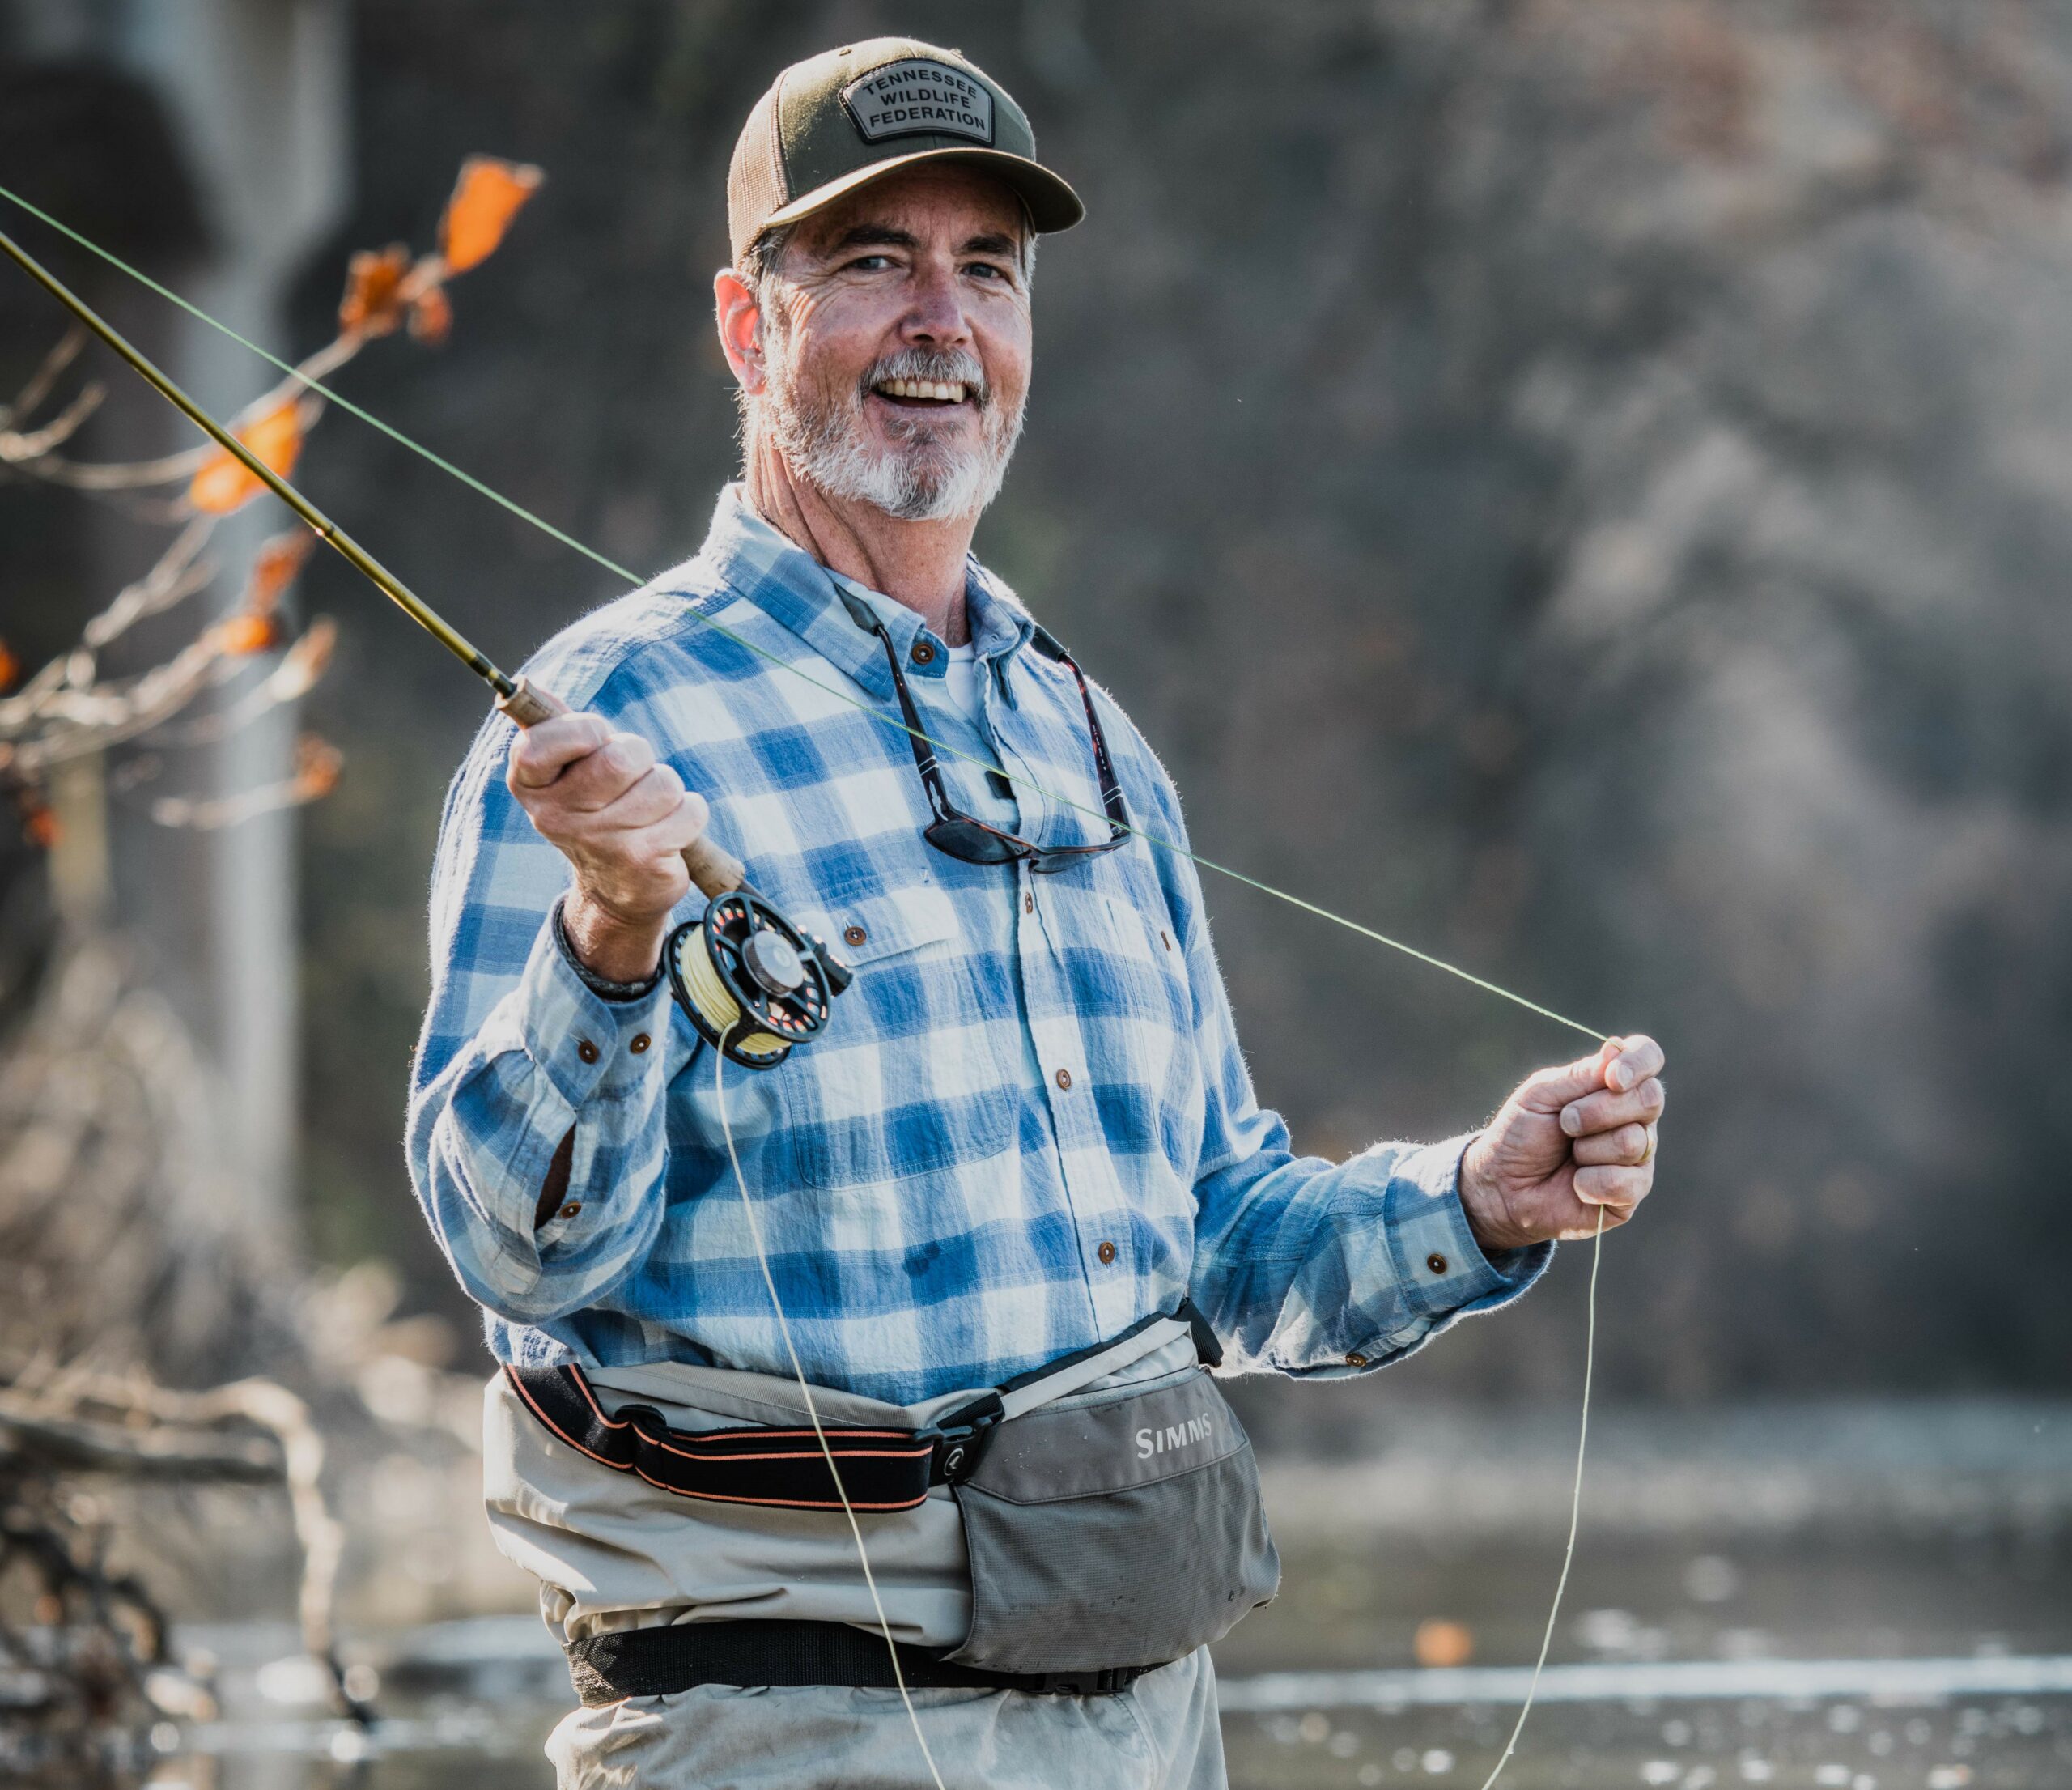 Learn How to Fly Fish